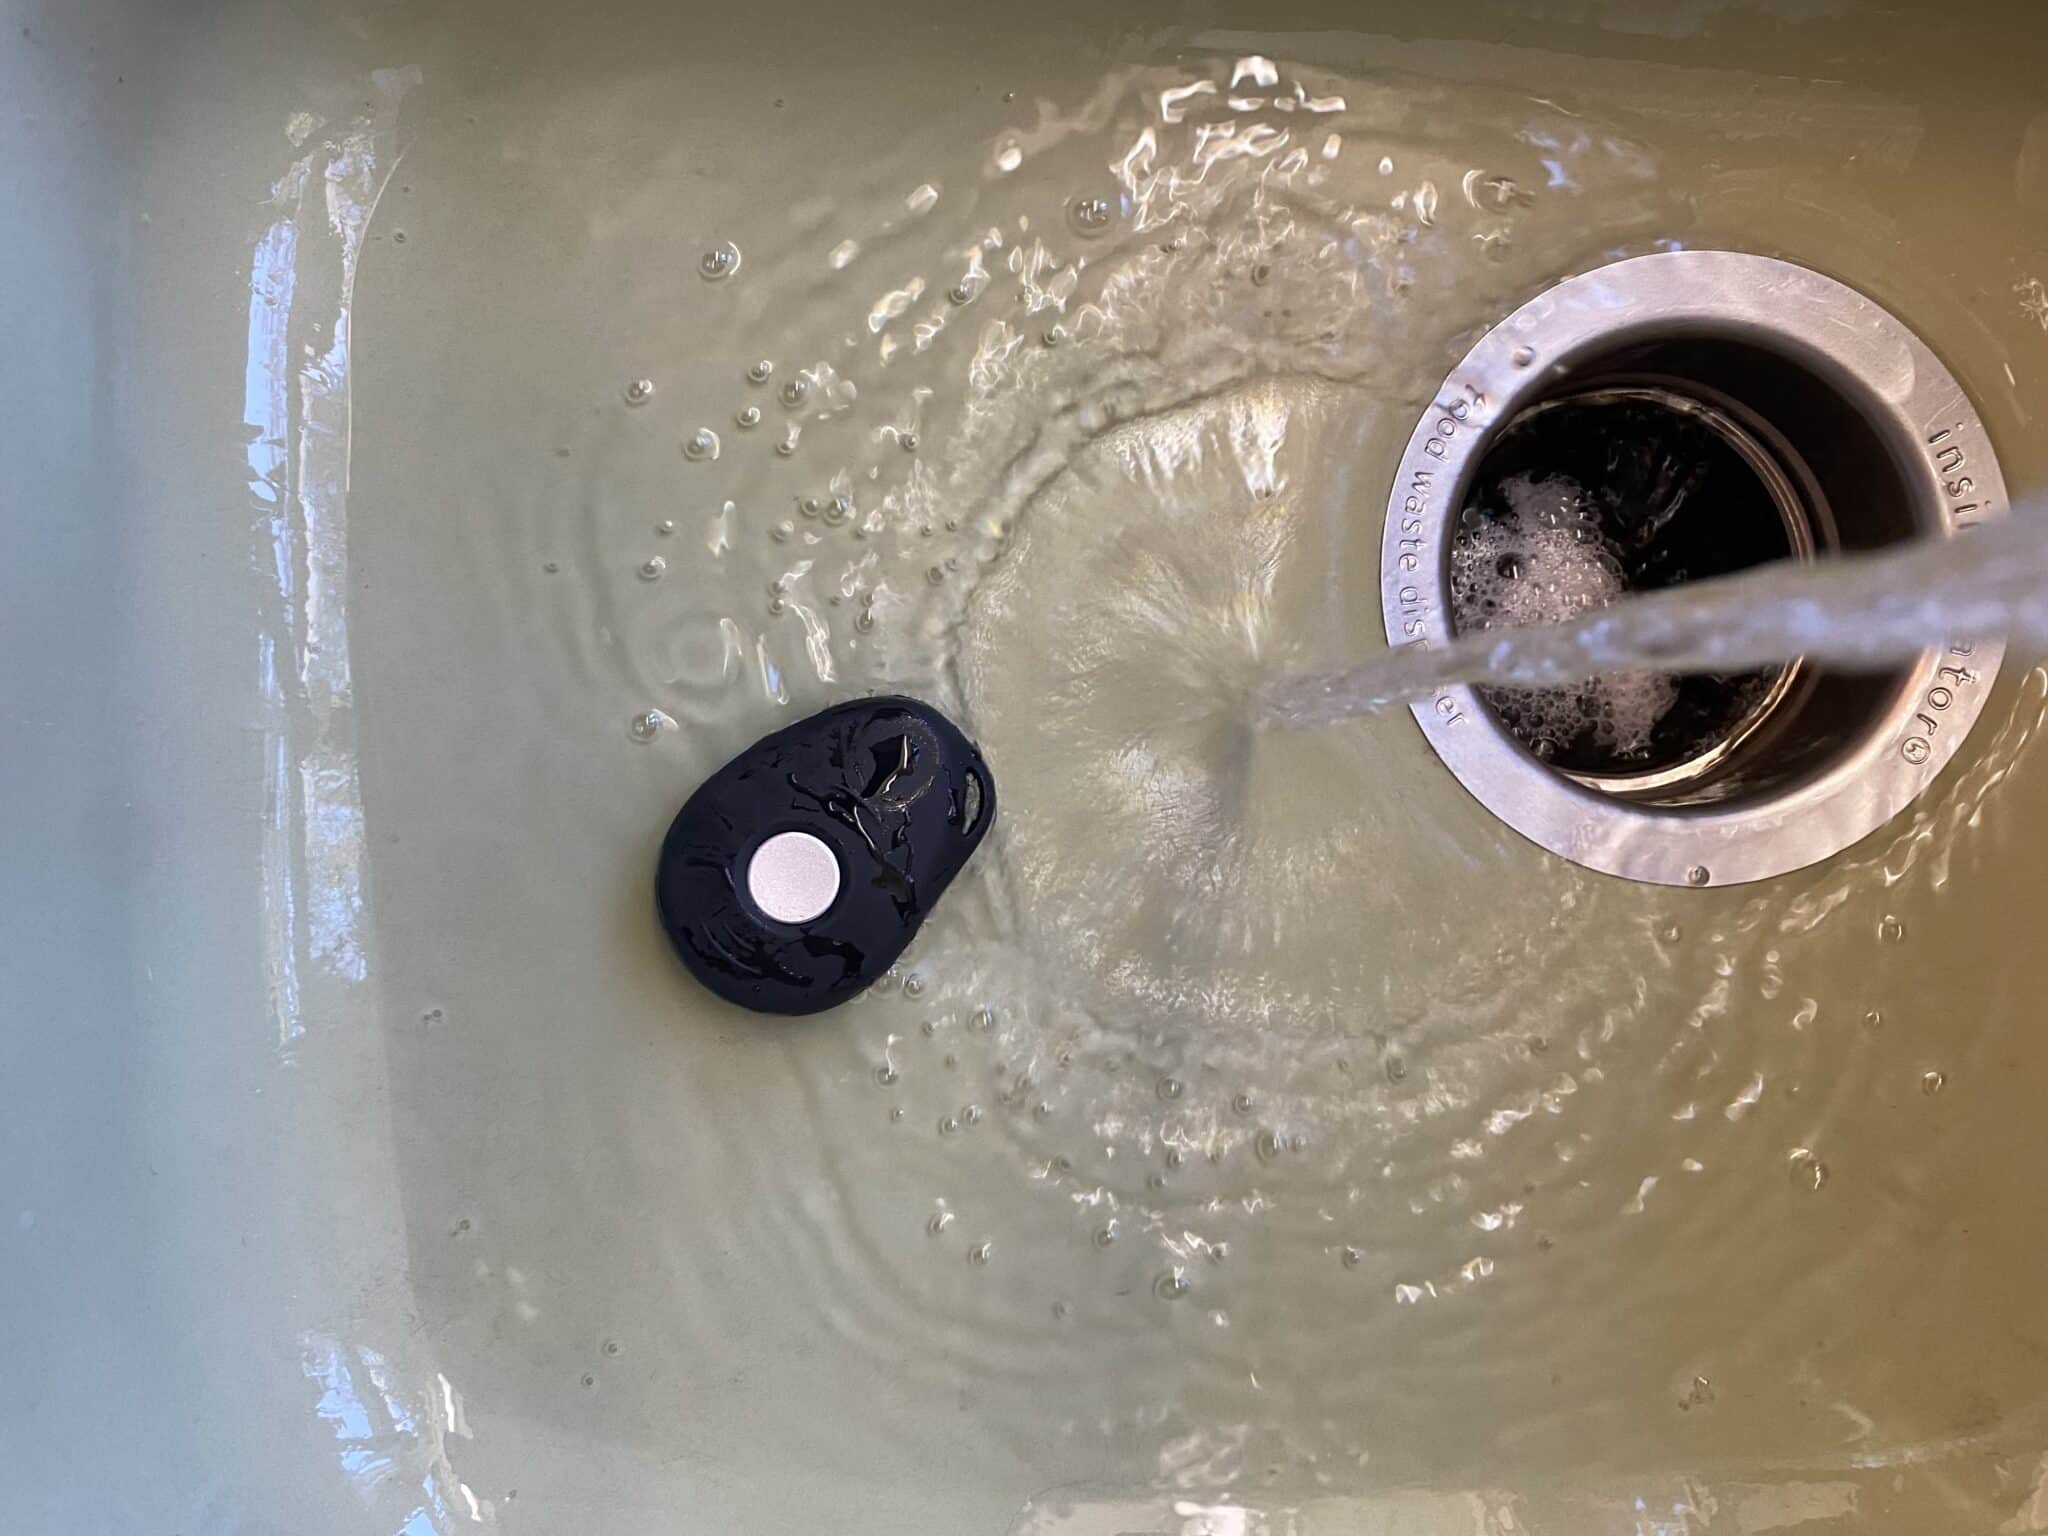 Black LifeFone mobile medical alert system in a sink with running water splashing on it